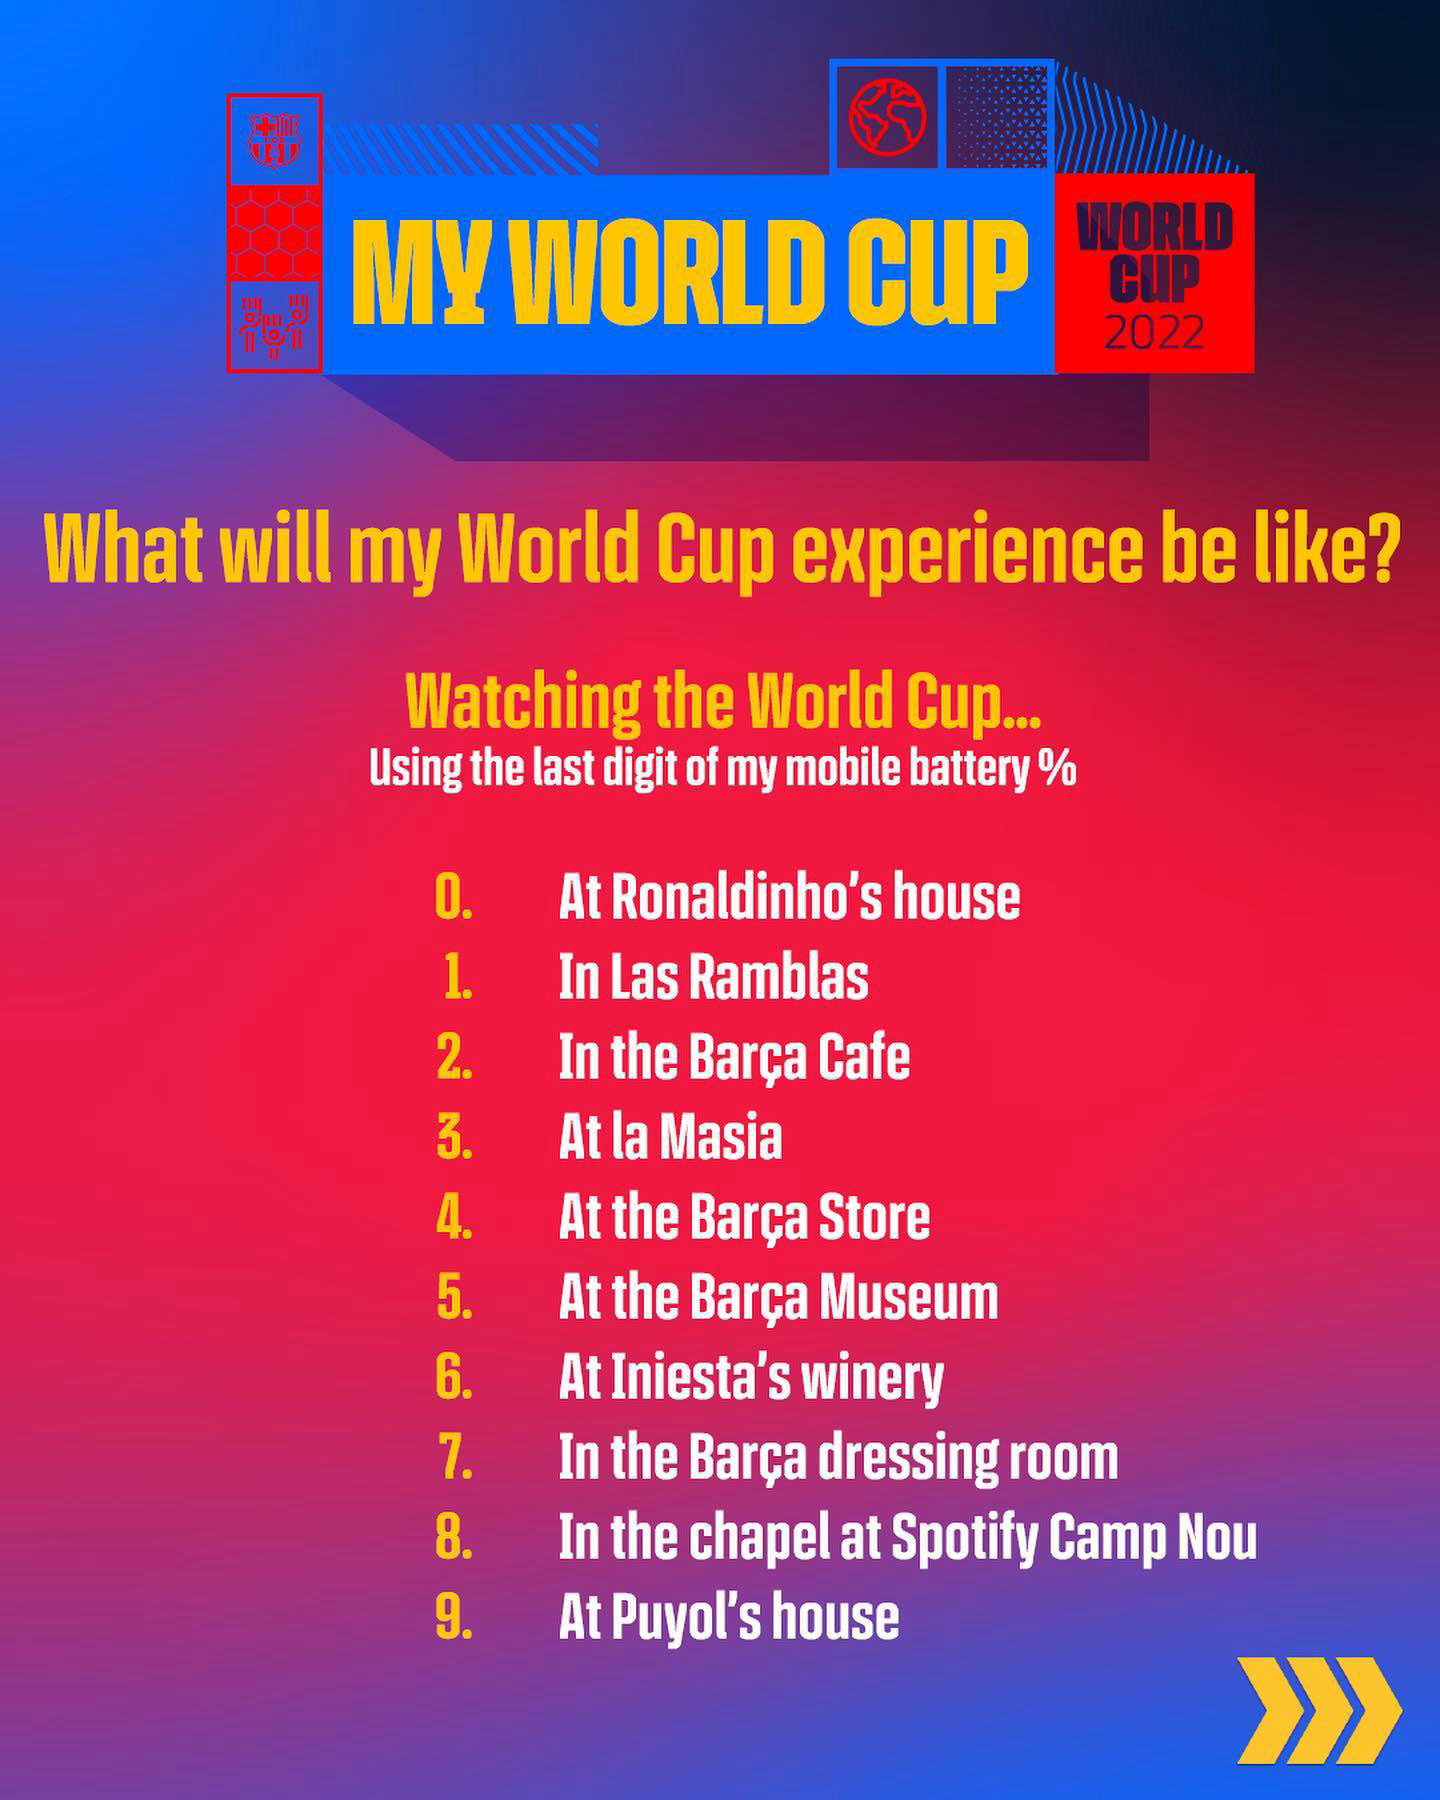 FC Barcelona - Share your World Cup experience with us